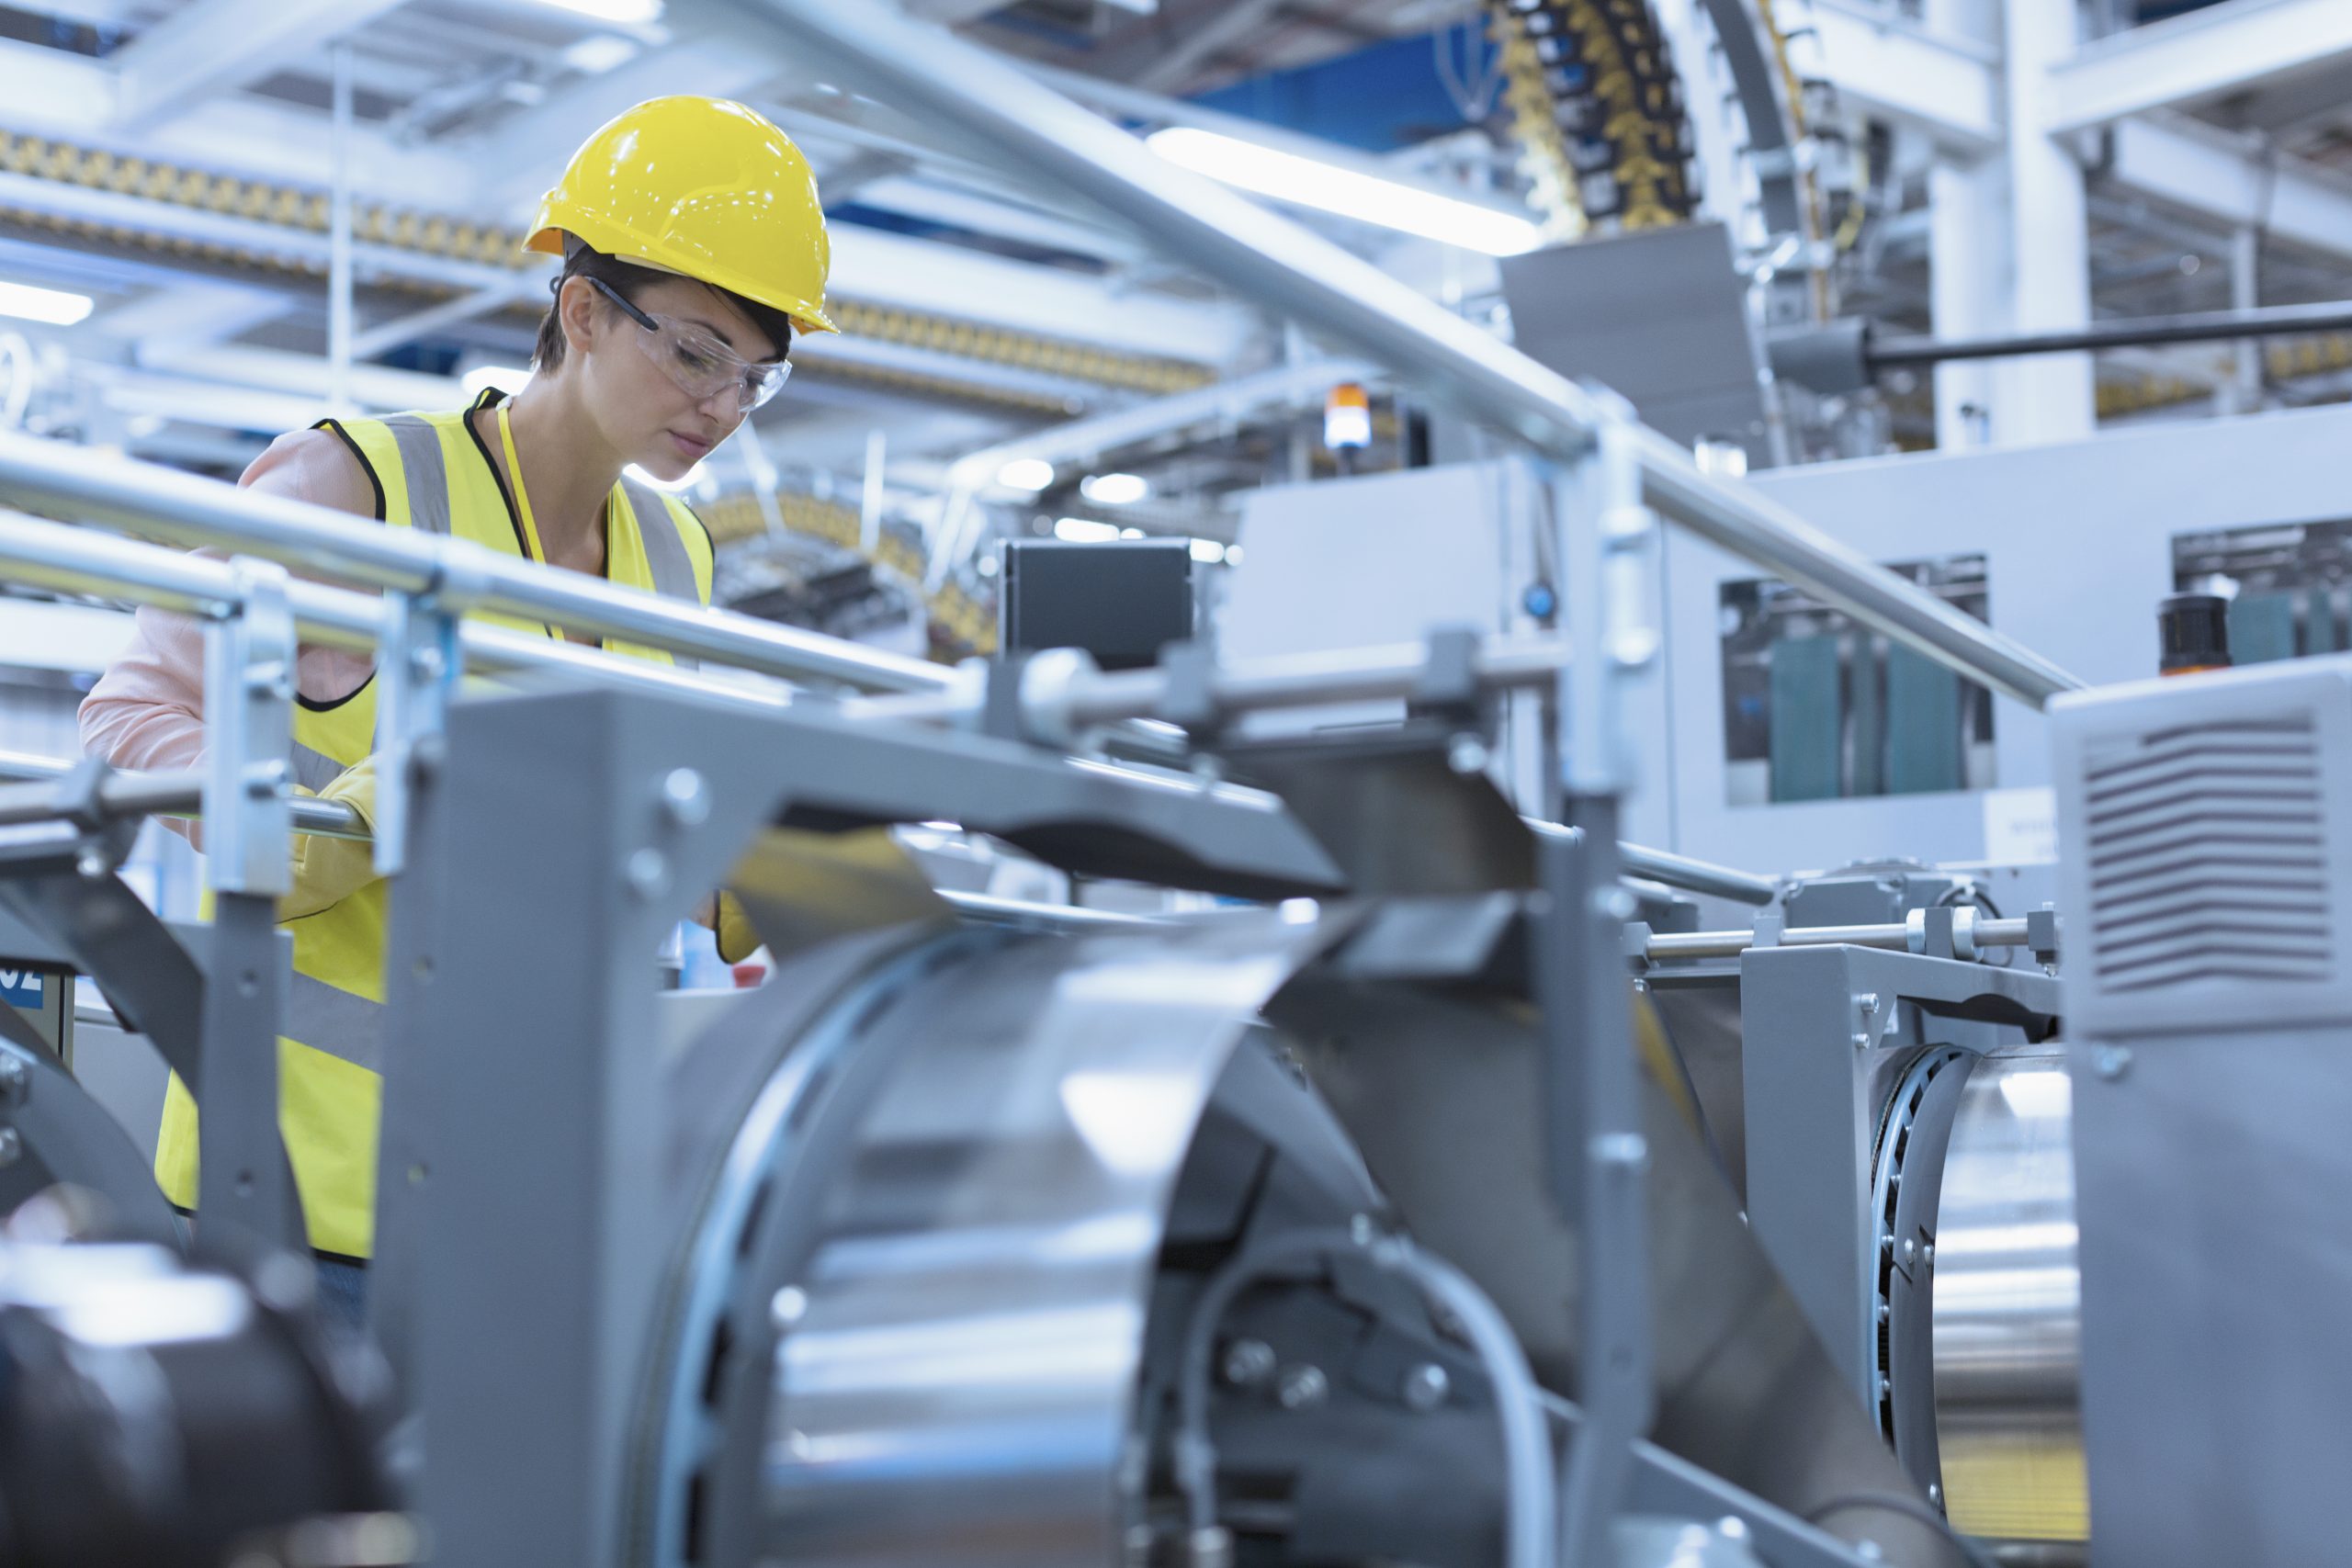 Technology trends in manufacturing: keep the advances, avoid the risks